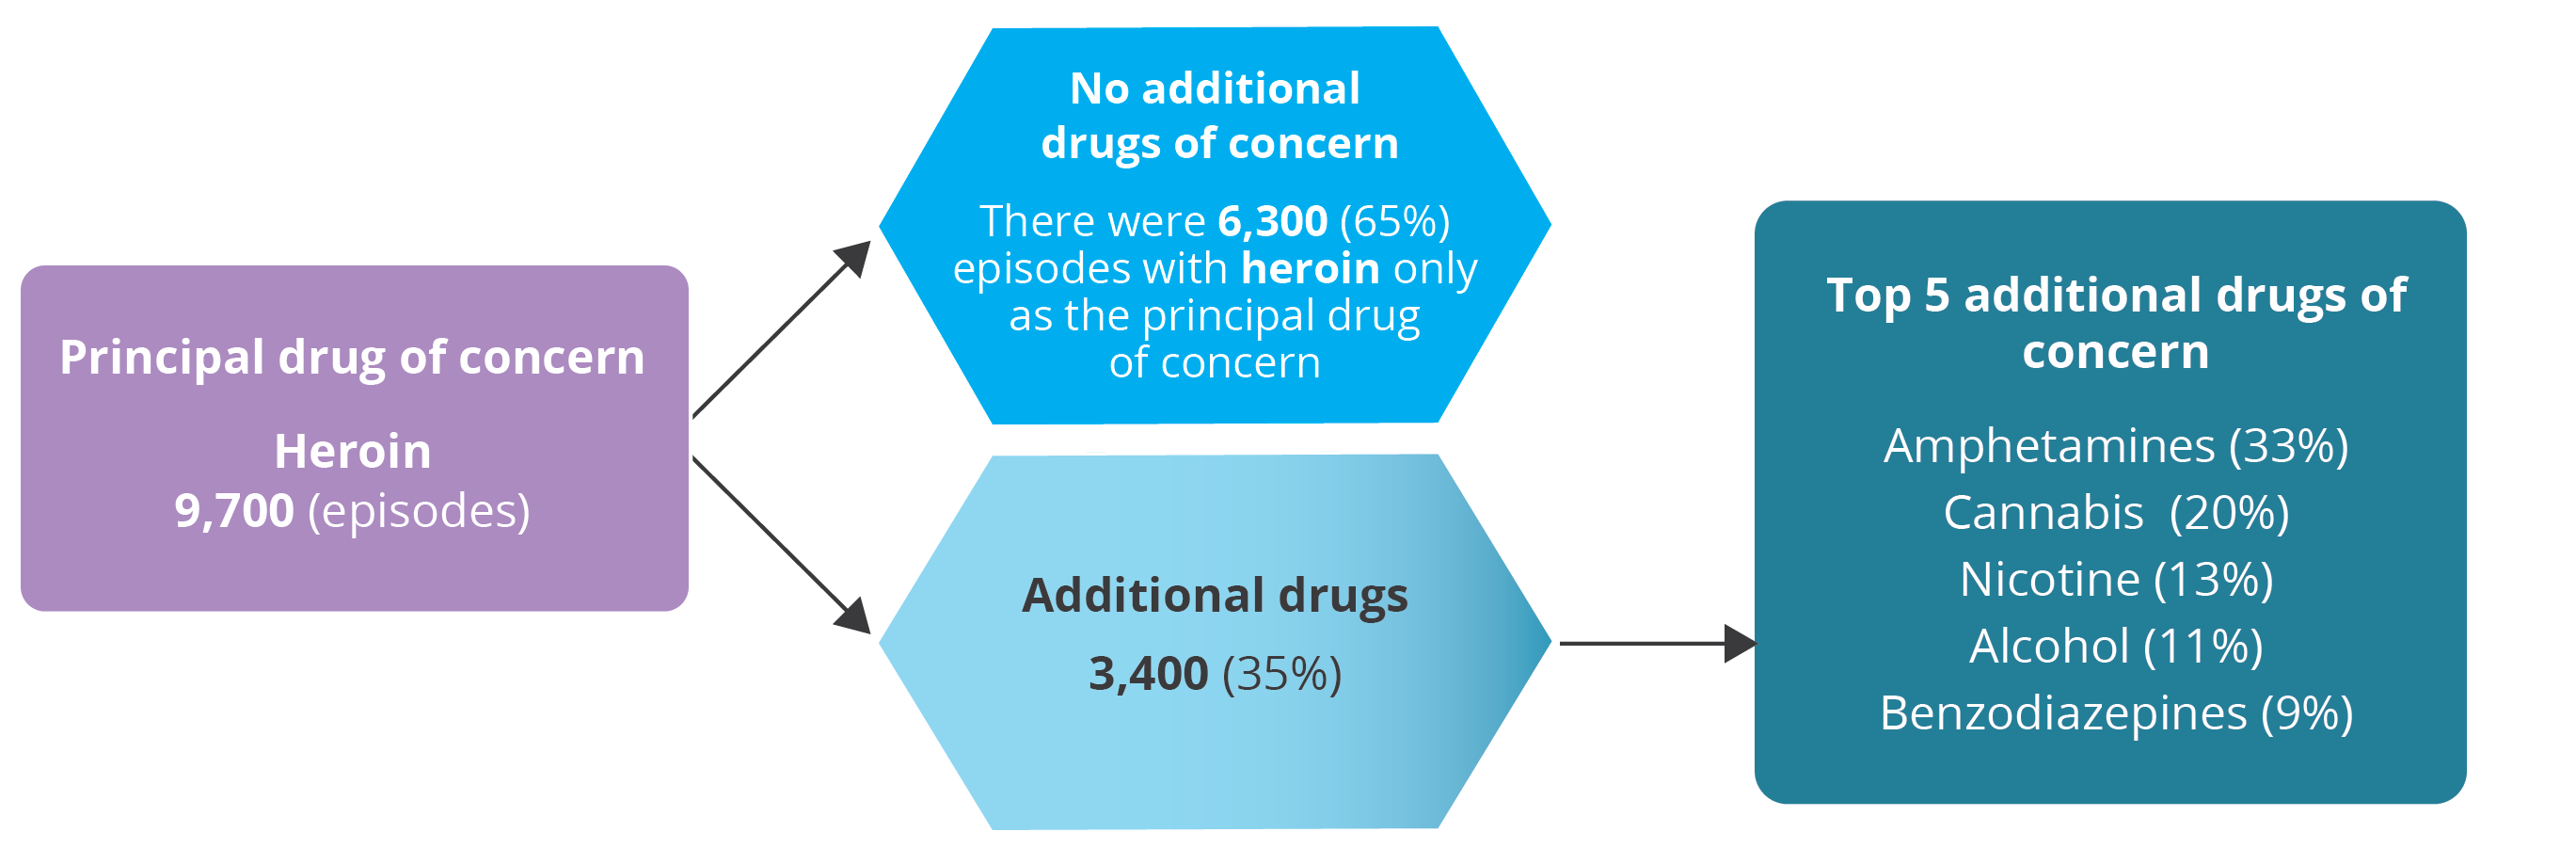 The flow chart shows heroin as a principal drug of concern broken down by additional drugs of concern.